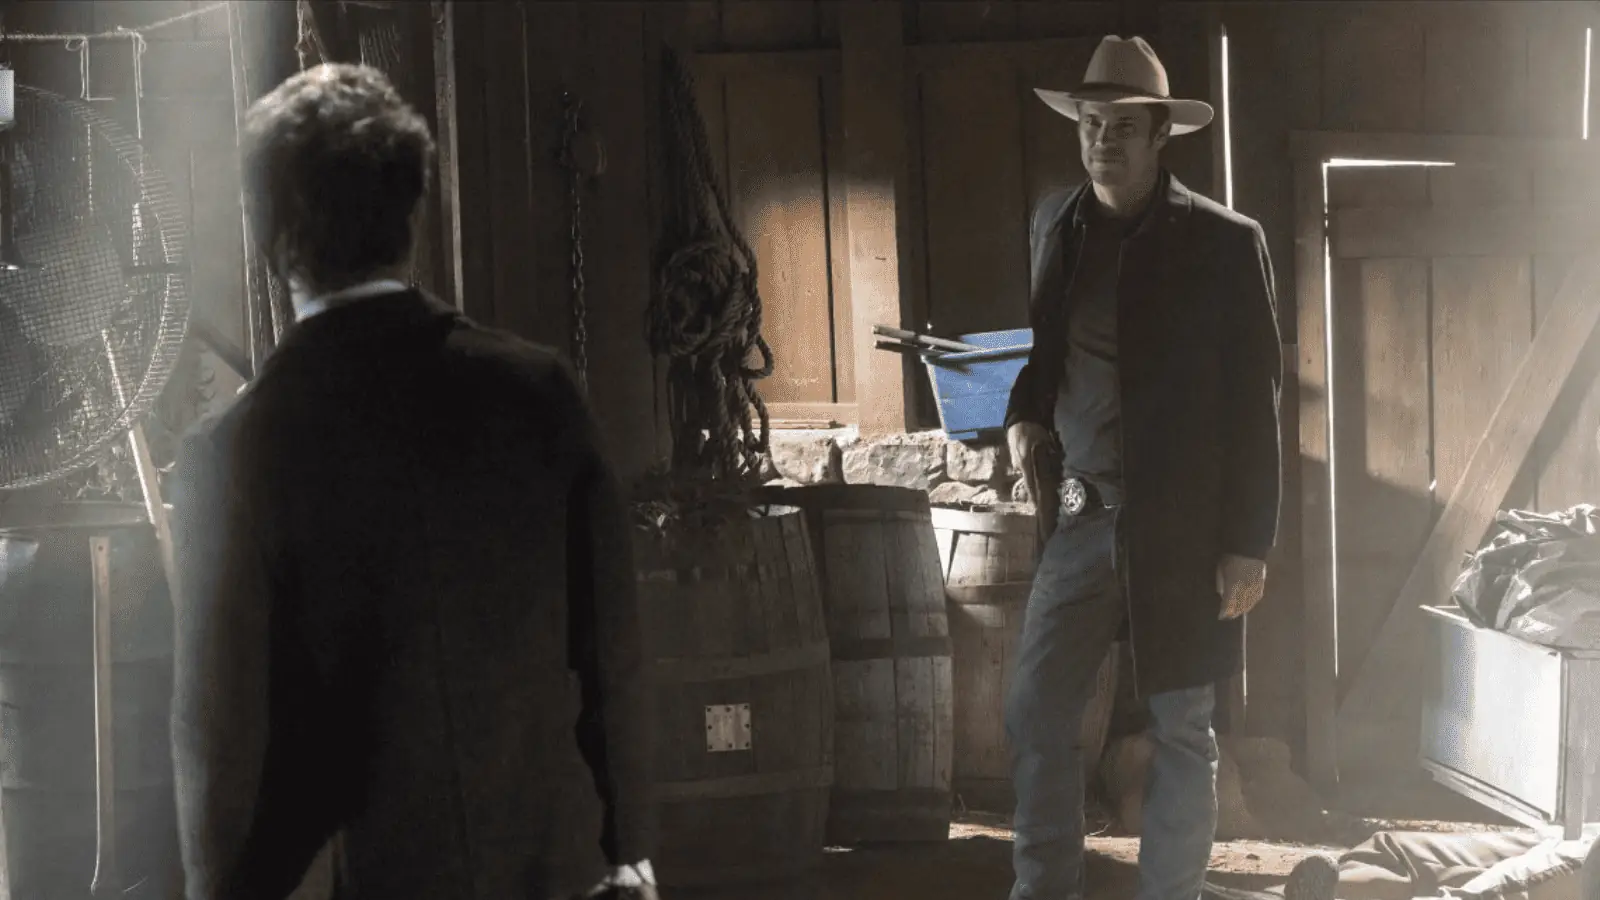 Scene from Justified